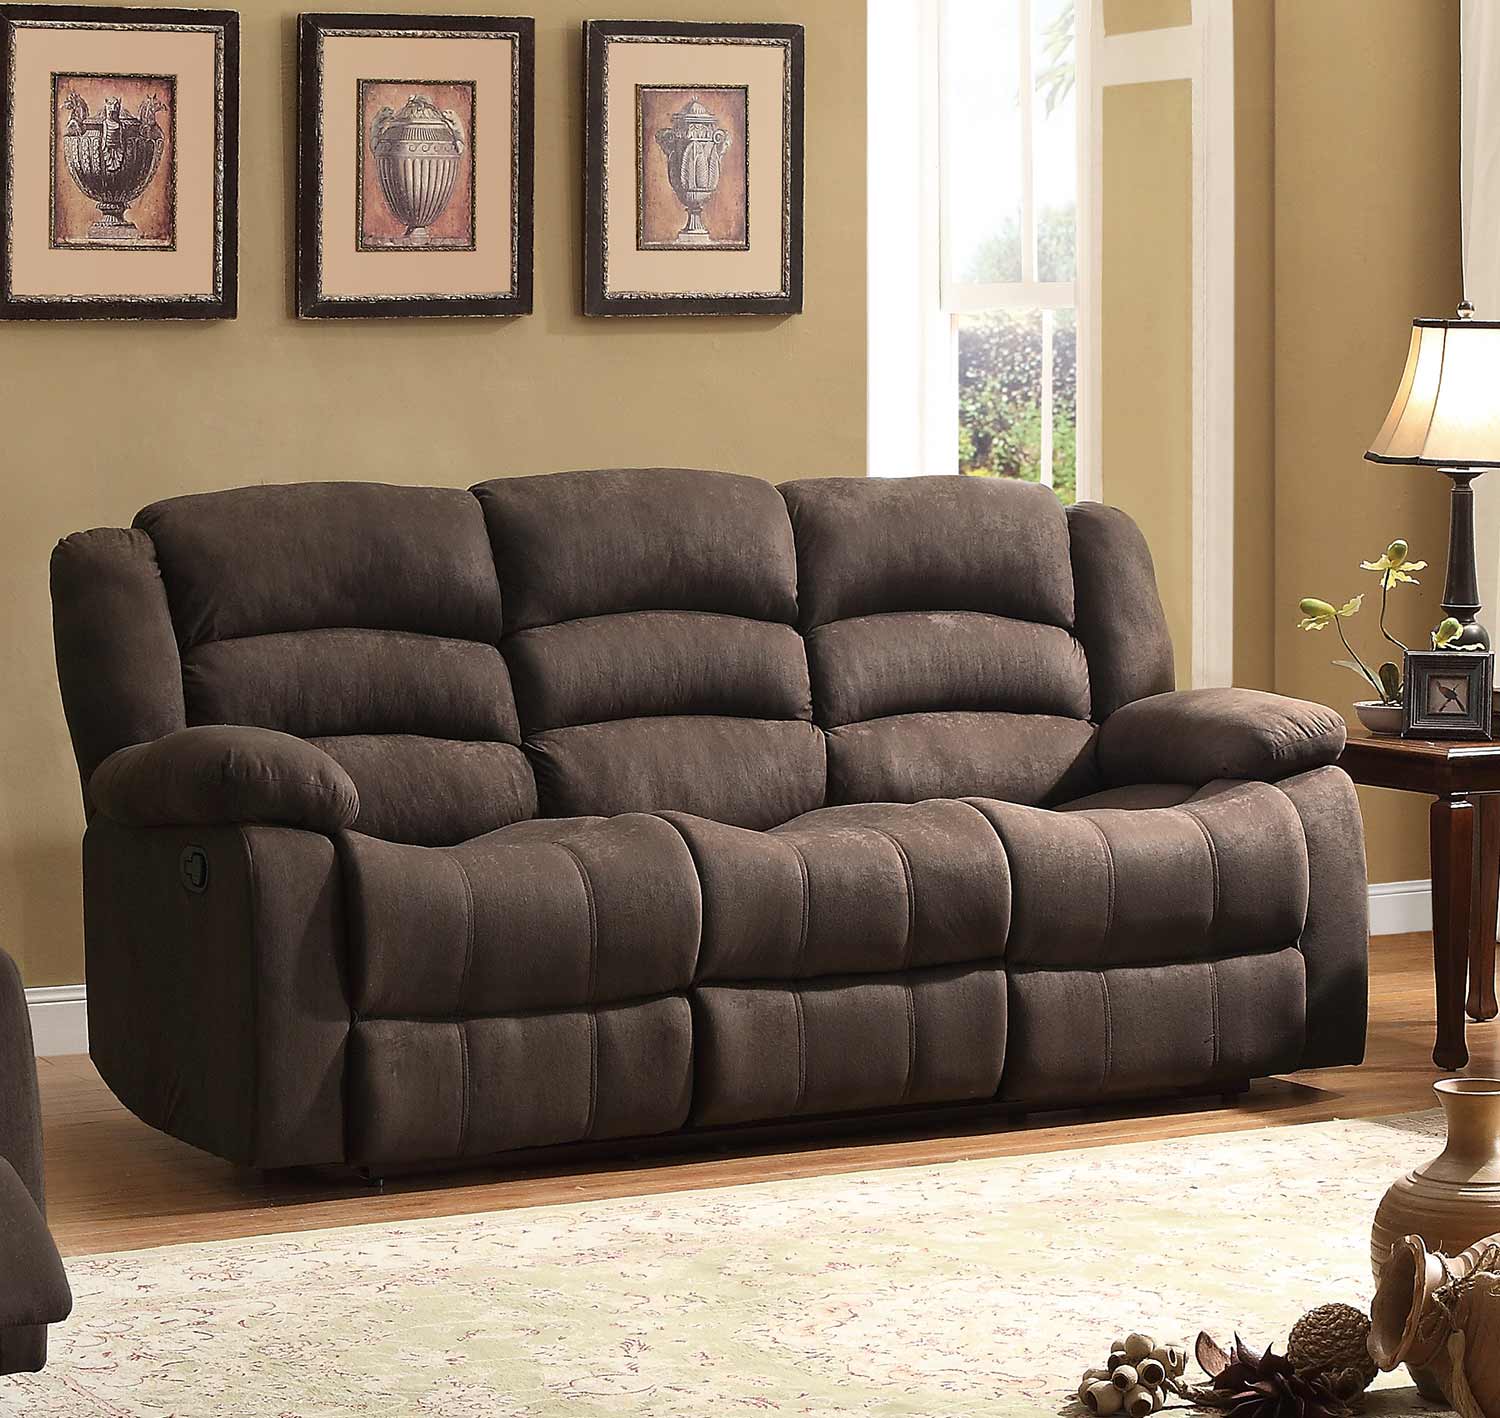 Homelegance Greenville Double Reclining Sofa - Chocolate